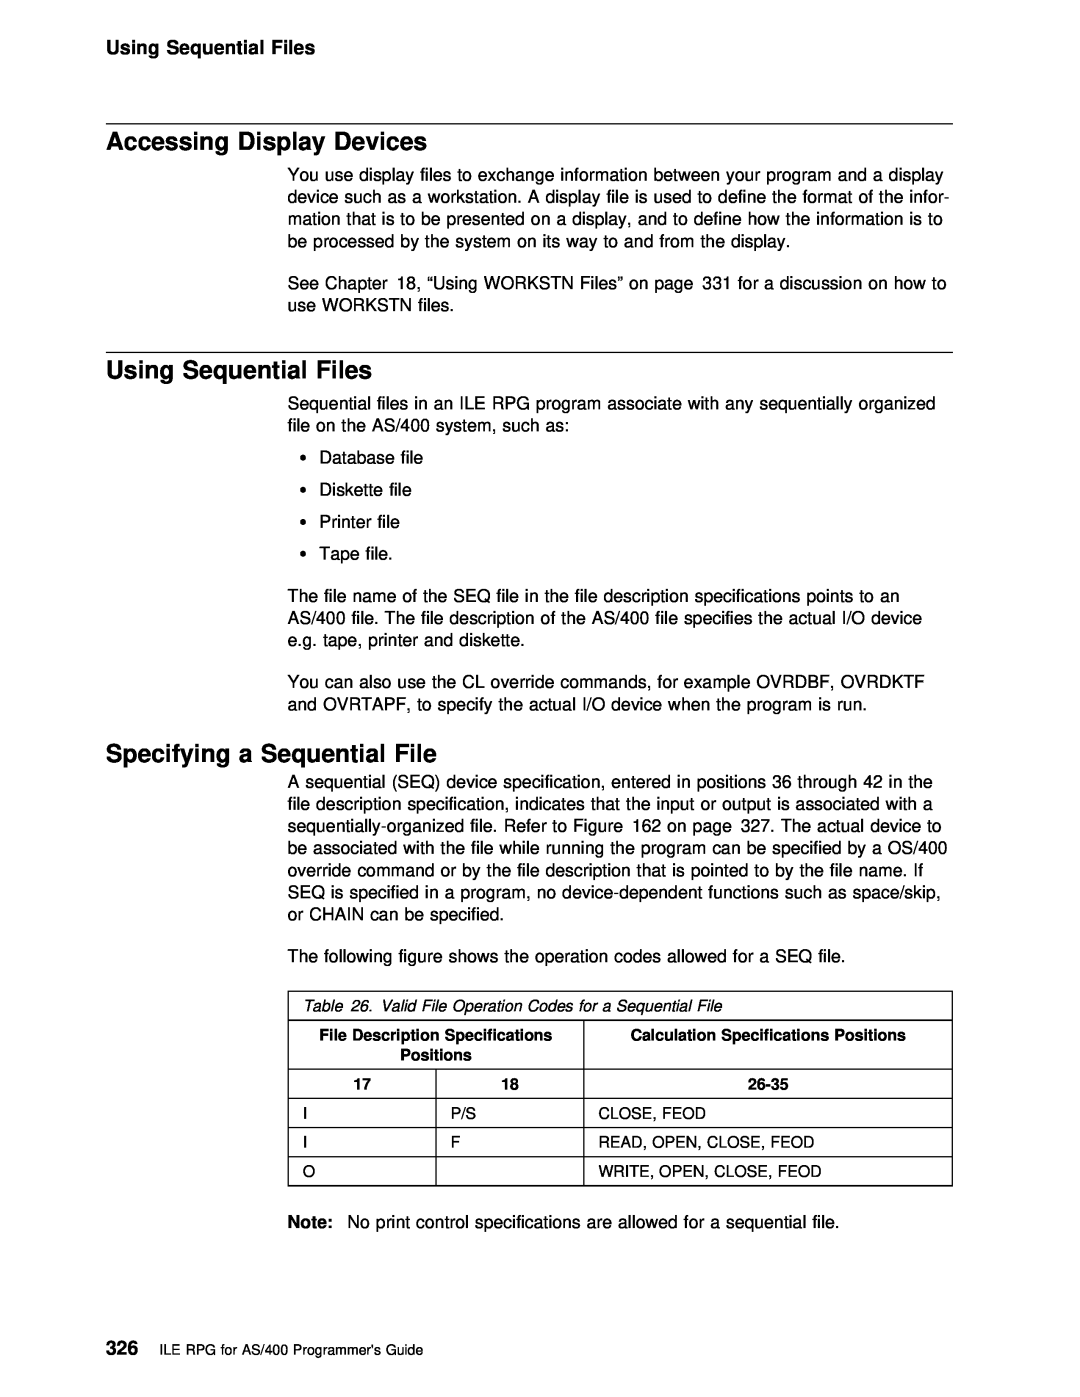 IBM AS/400 manual Accessing Display Devices, Using Sequential Files, Specifying a Sequential 